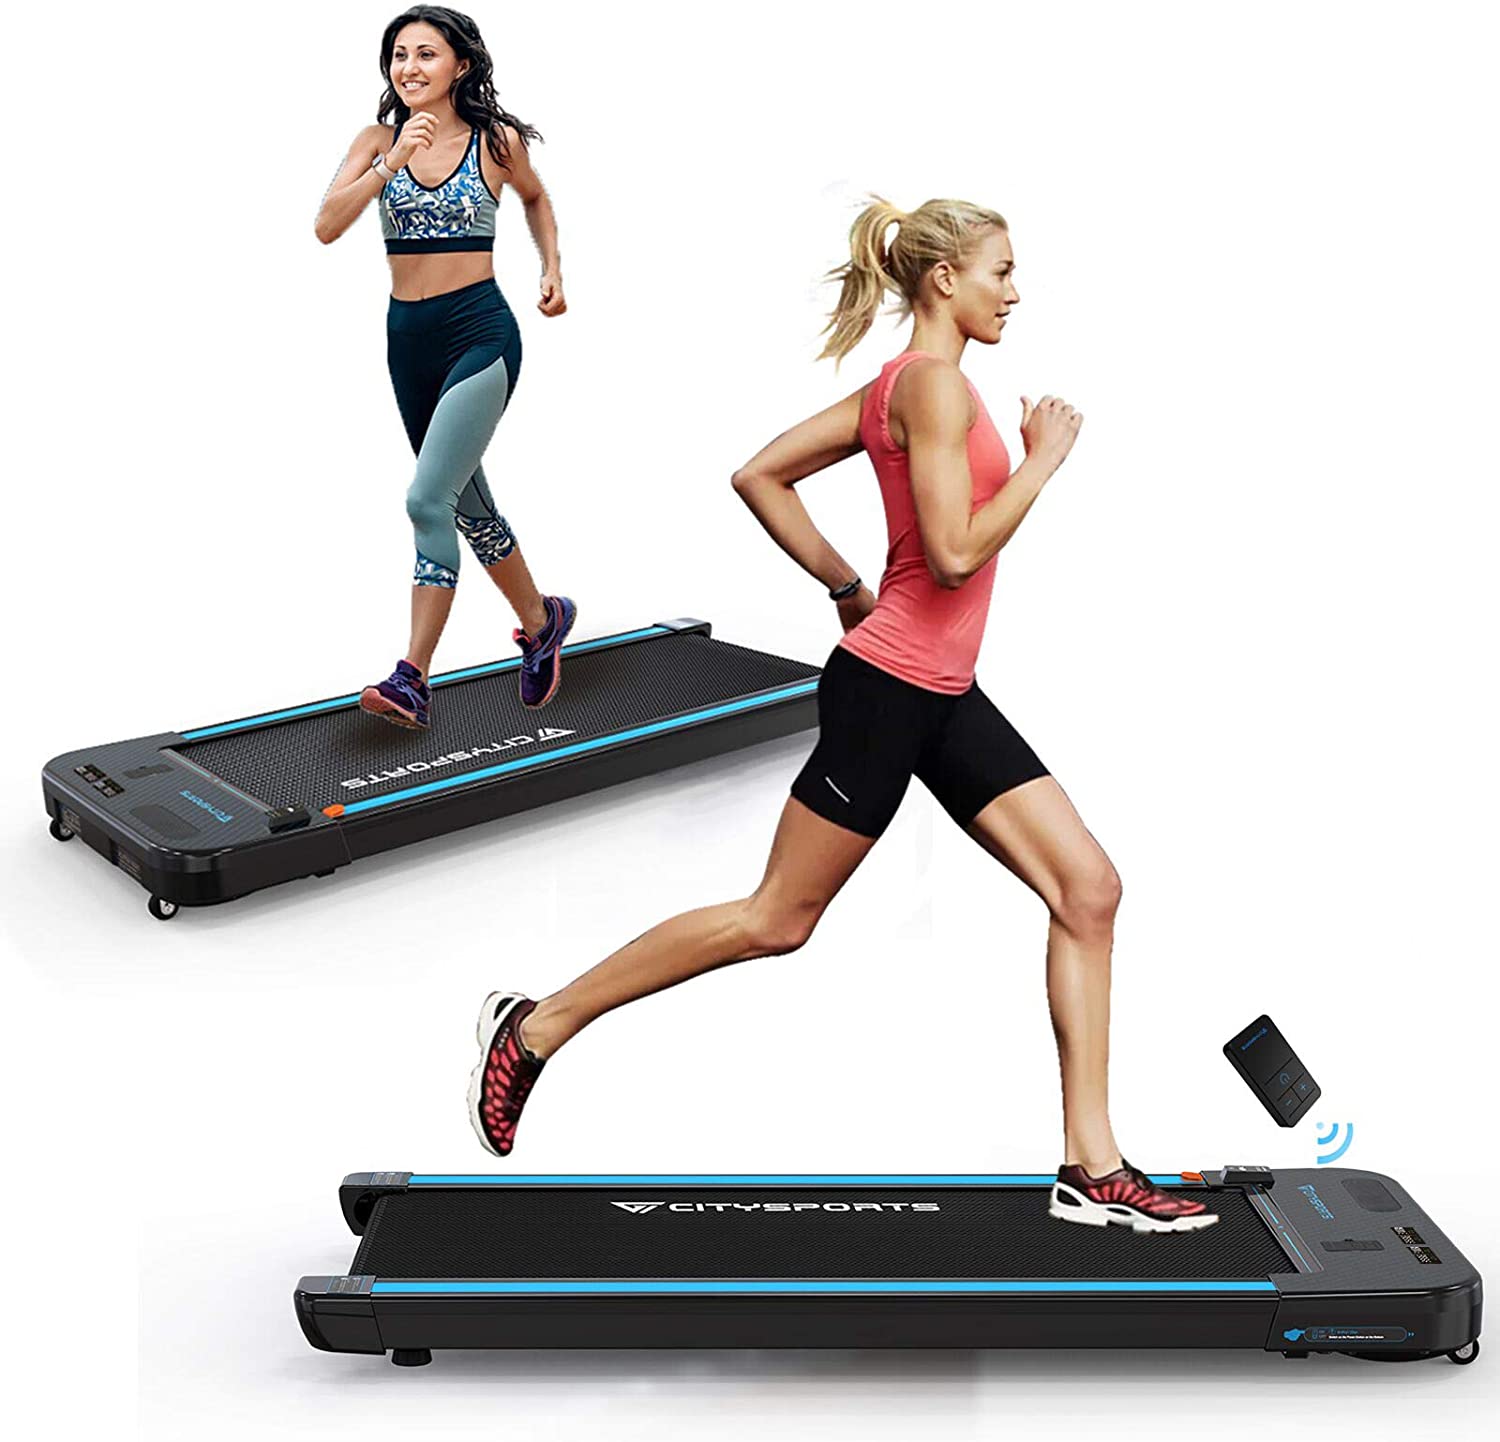 Gearstone Treadmills for Home, CITYSPORTS Walking Pad Treadmill with Audio Speakers, Slim & Portable - image 1 of 7